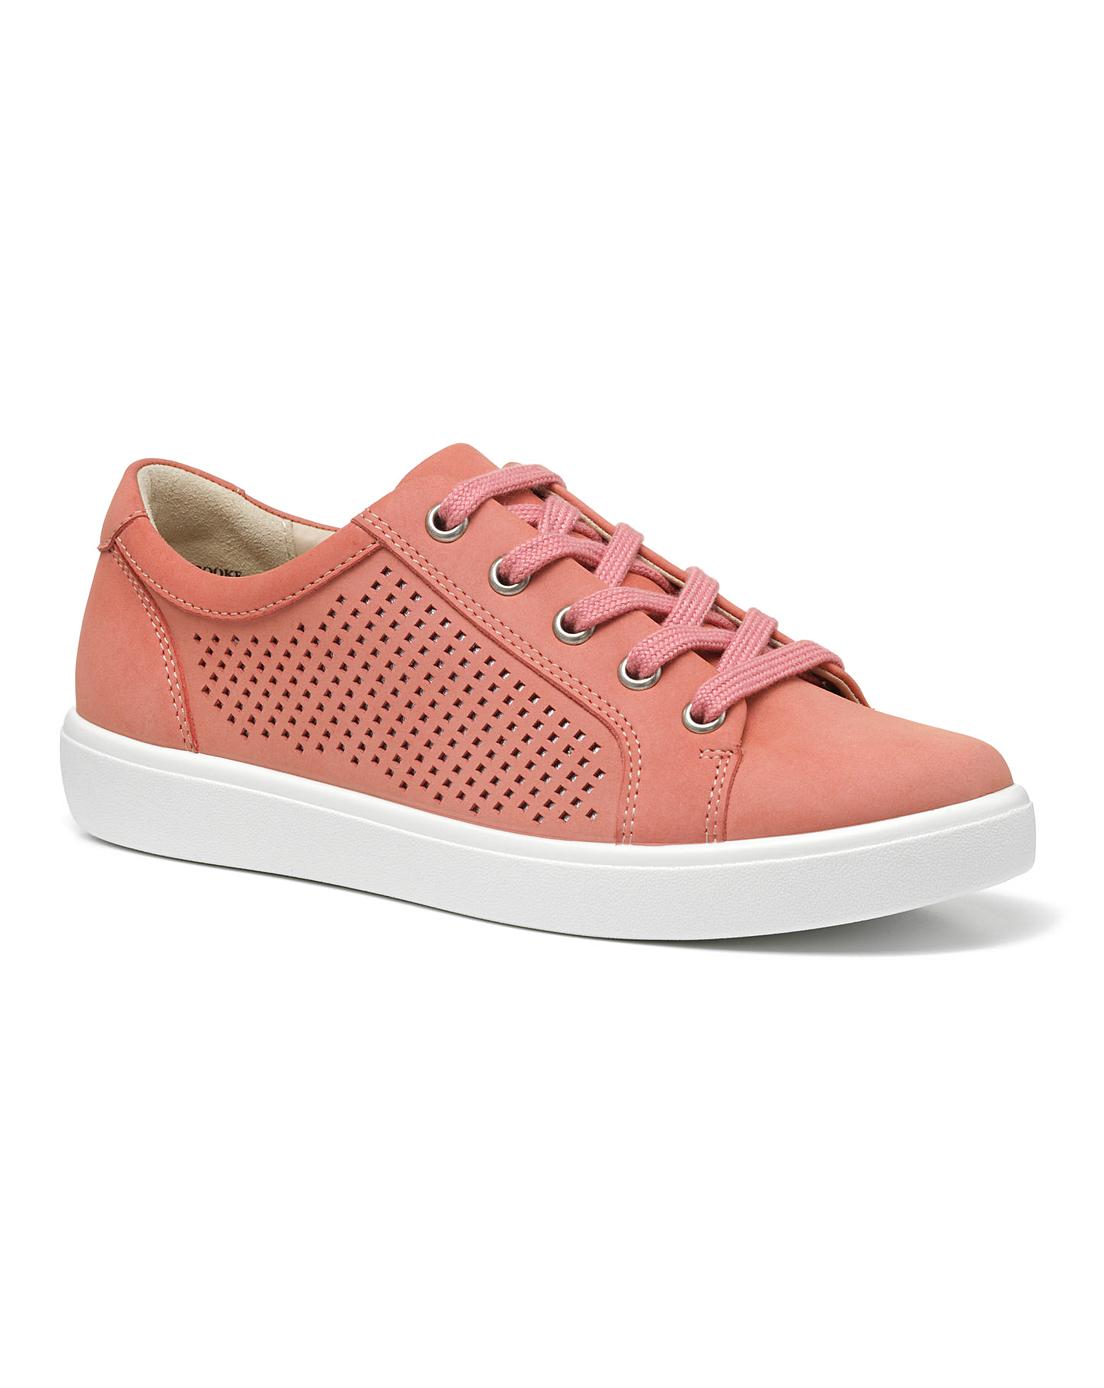 Hotter Brooke Wide Fit Lace-Up Shoe | Ambrose Wilson